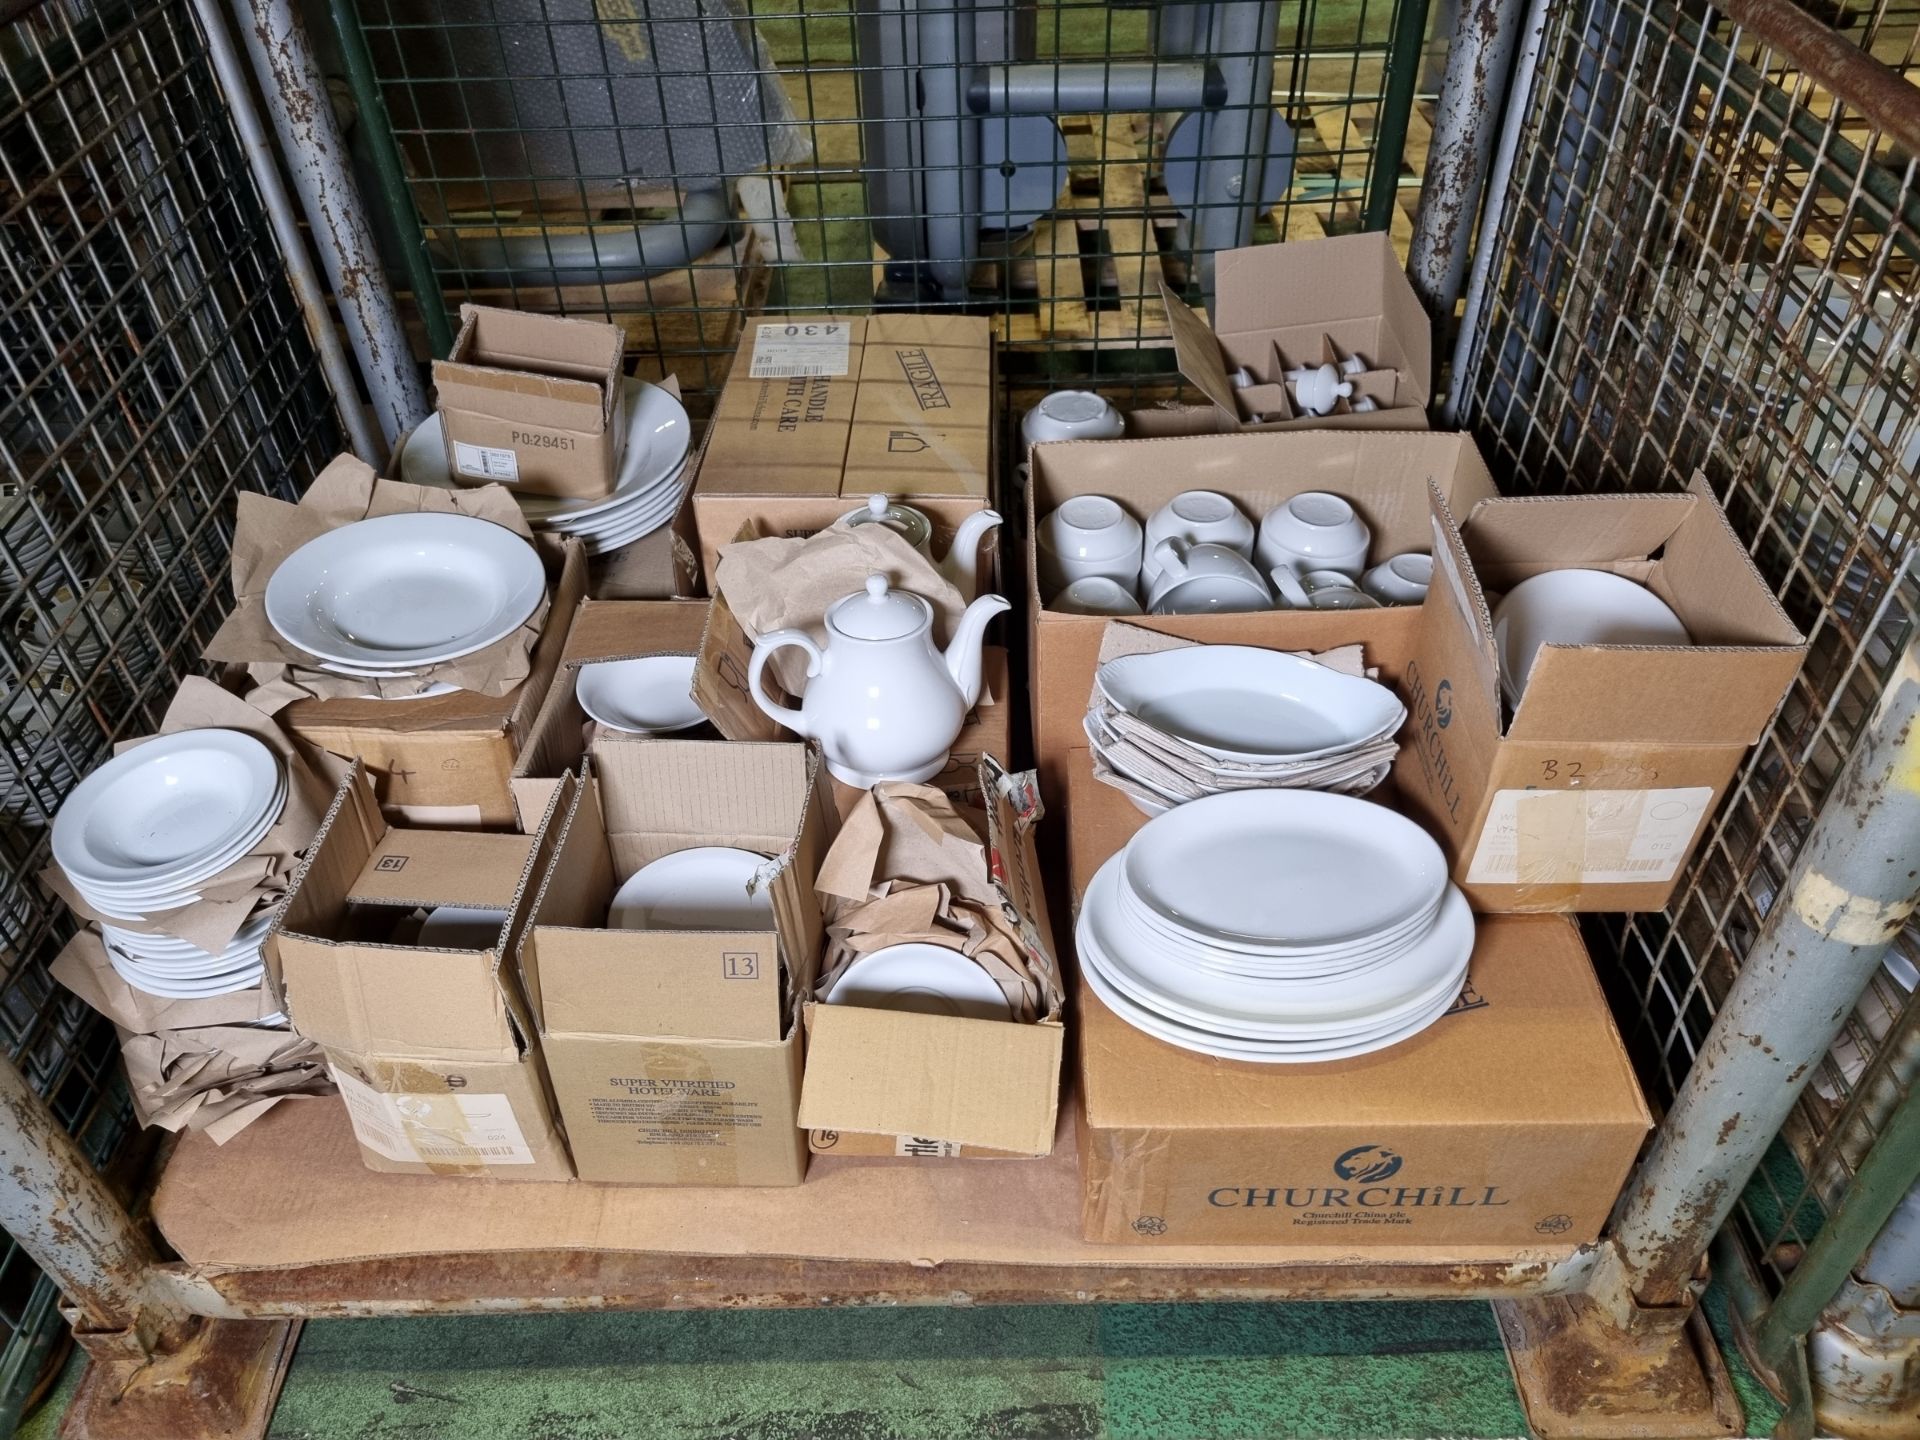 Catering Equipment - White plates, saucers, bowls, cups, teapot, salt + pepper pot - Image 2 of 5